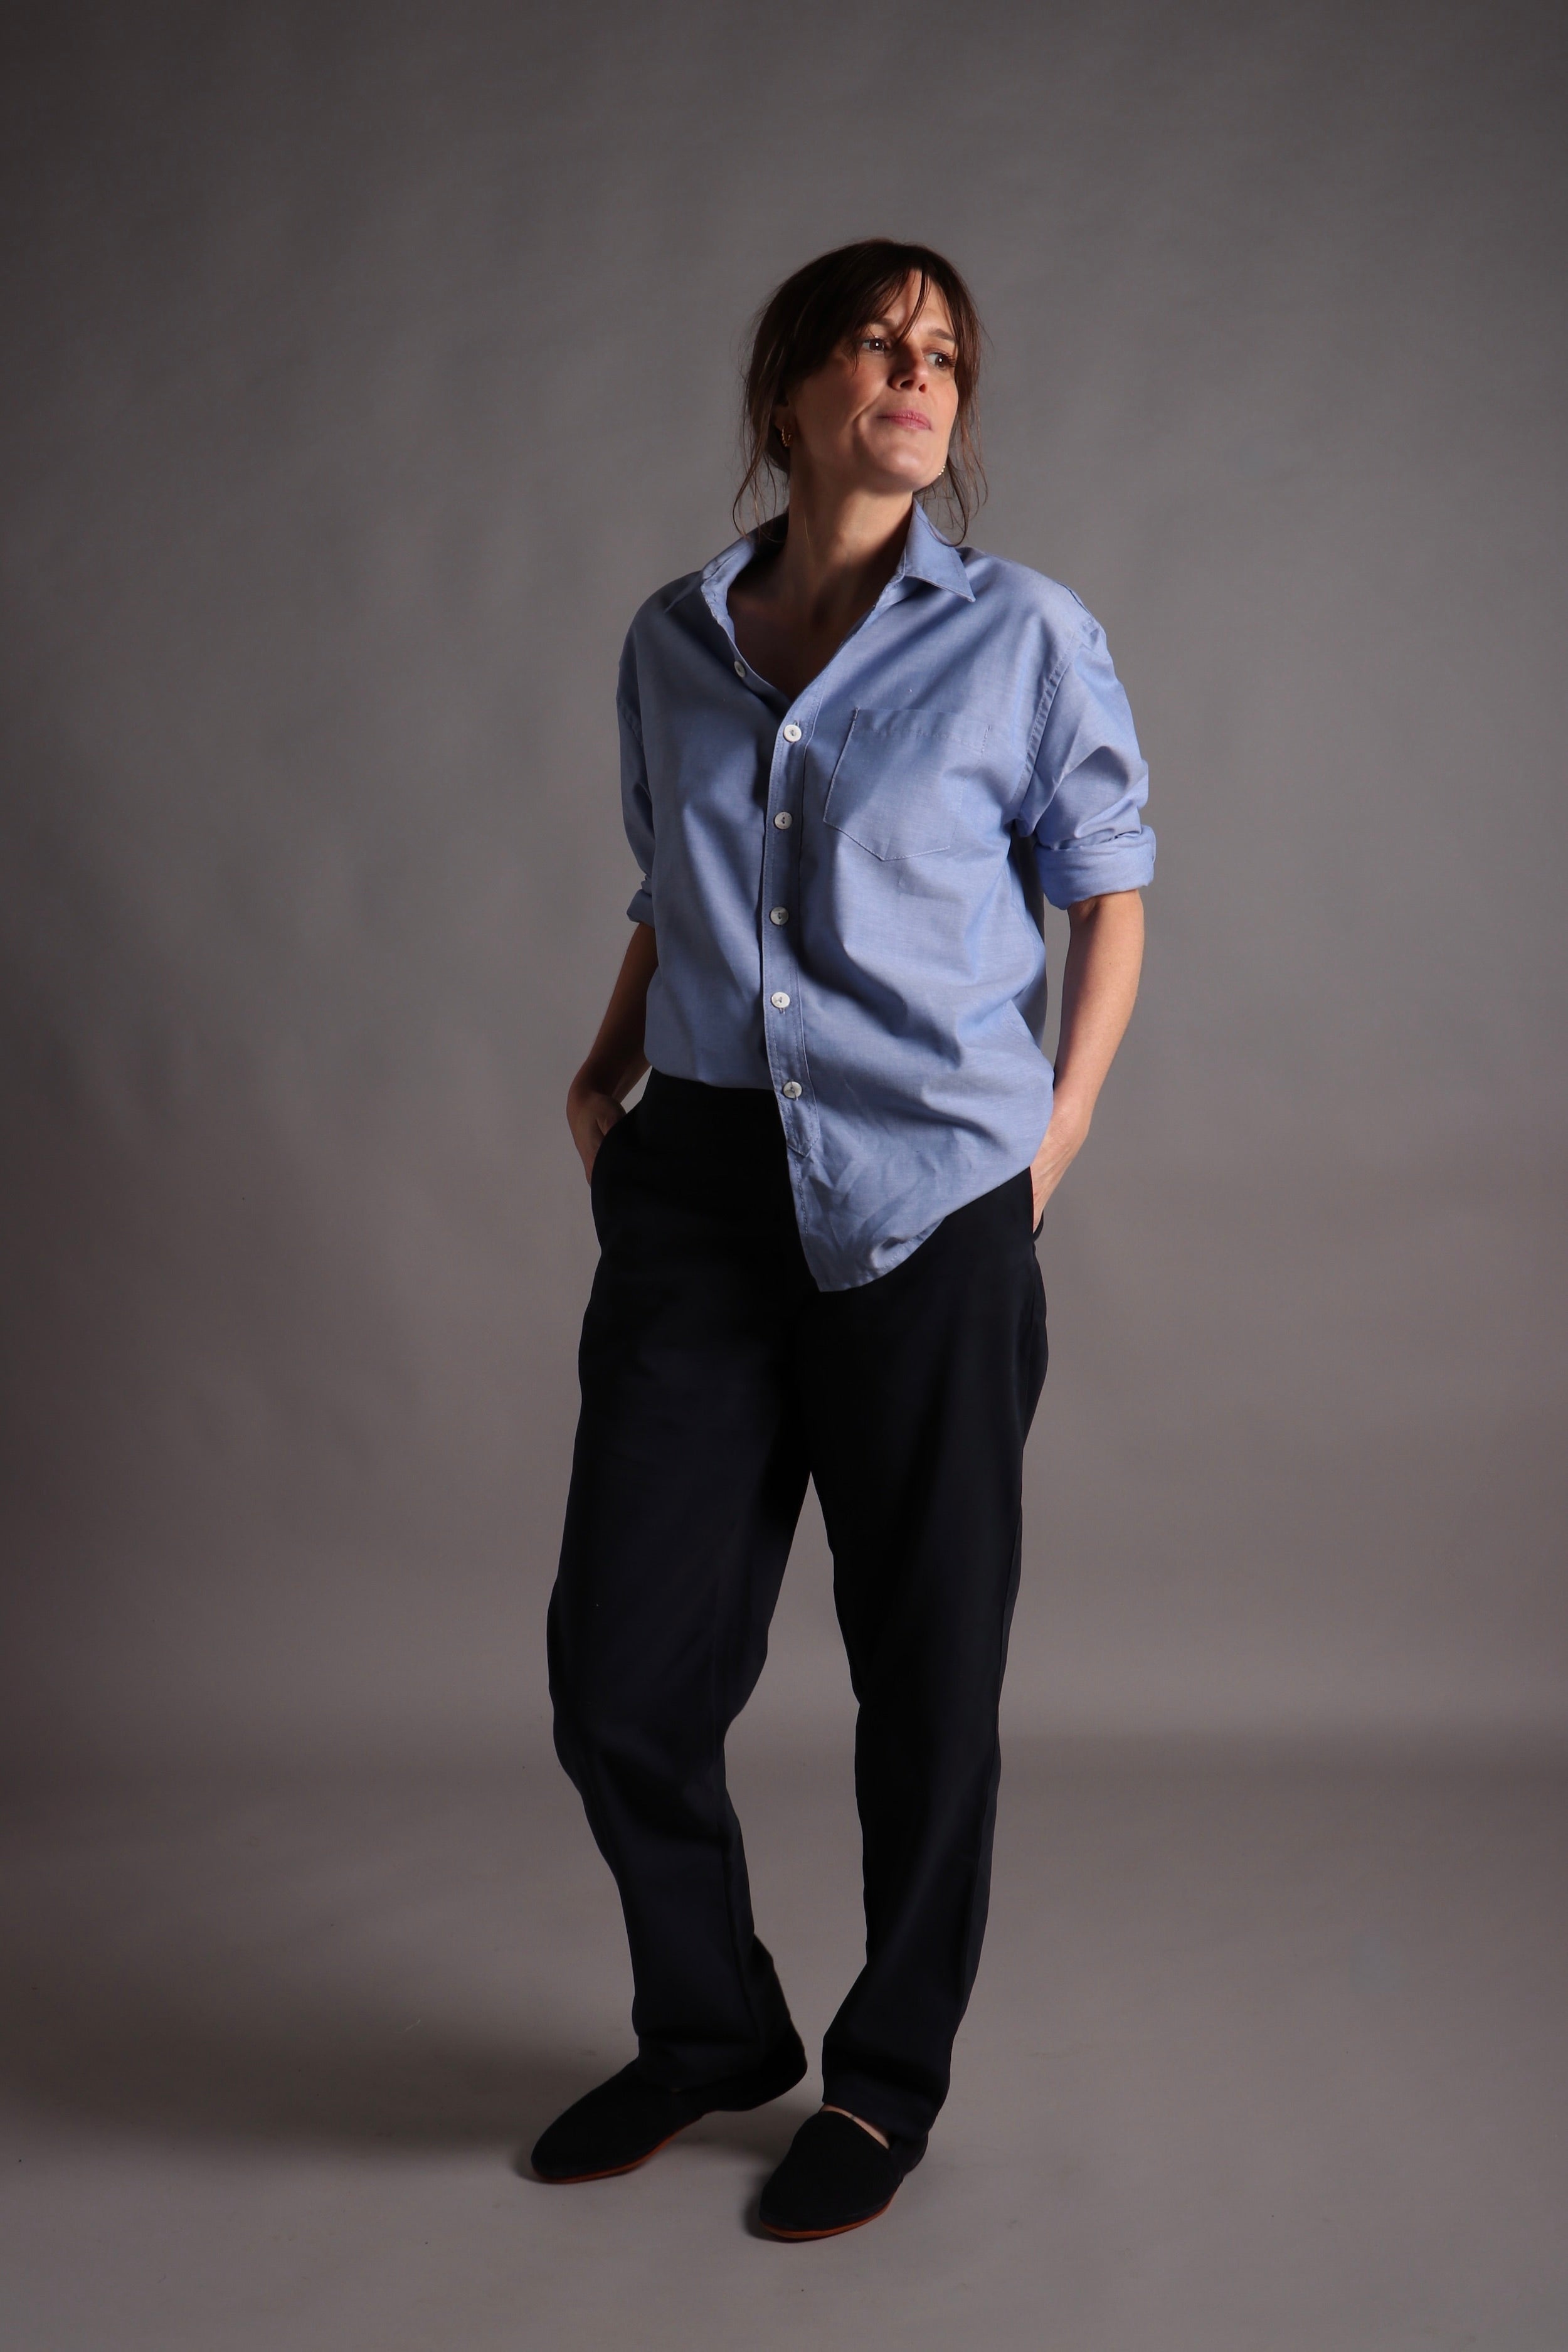 Kate wears Carrier Company Colonial Trouser in Navy Cotton Drill with Chambray Shirt